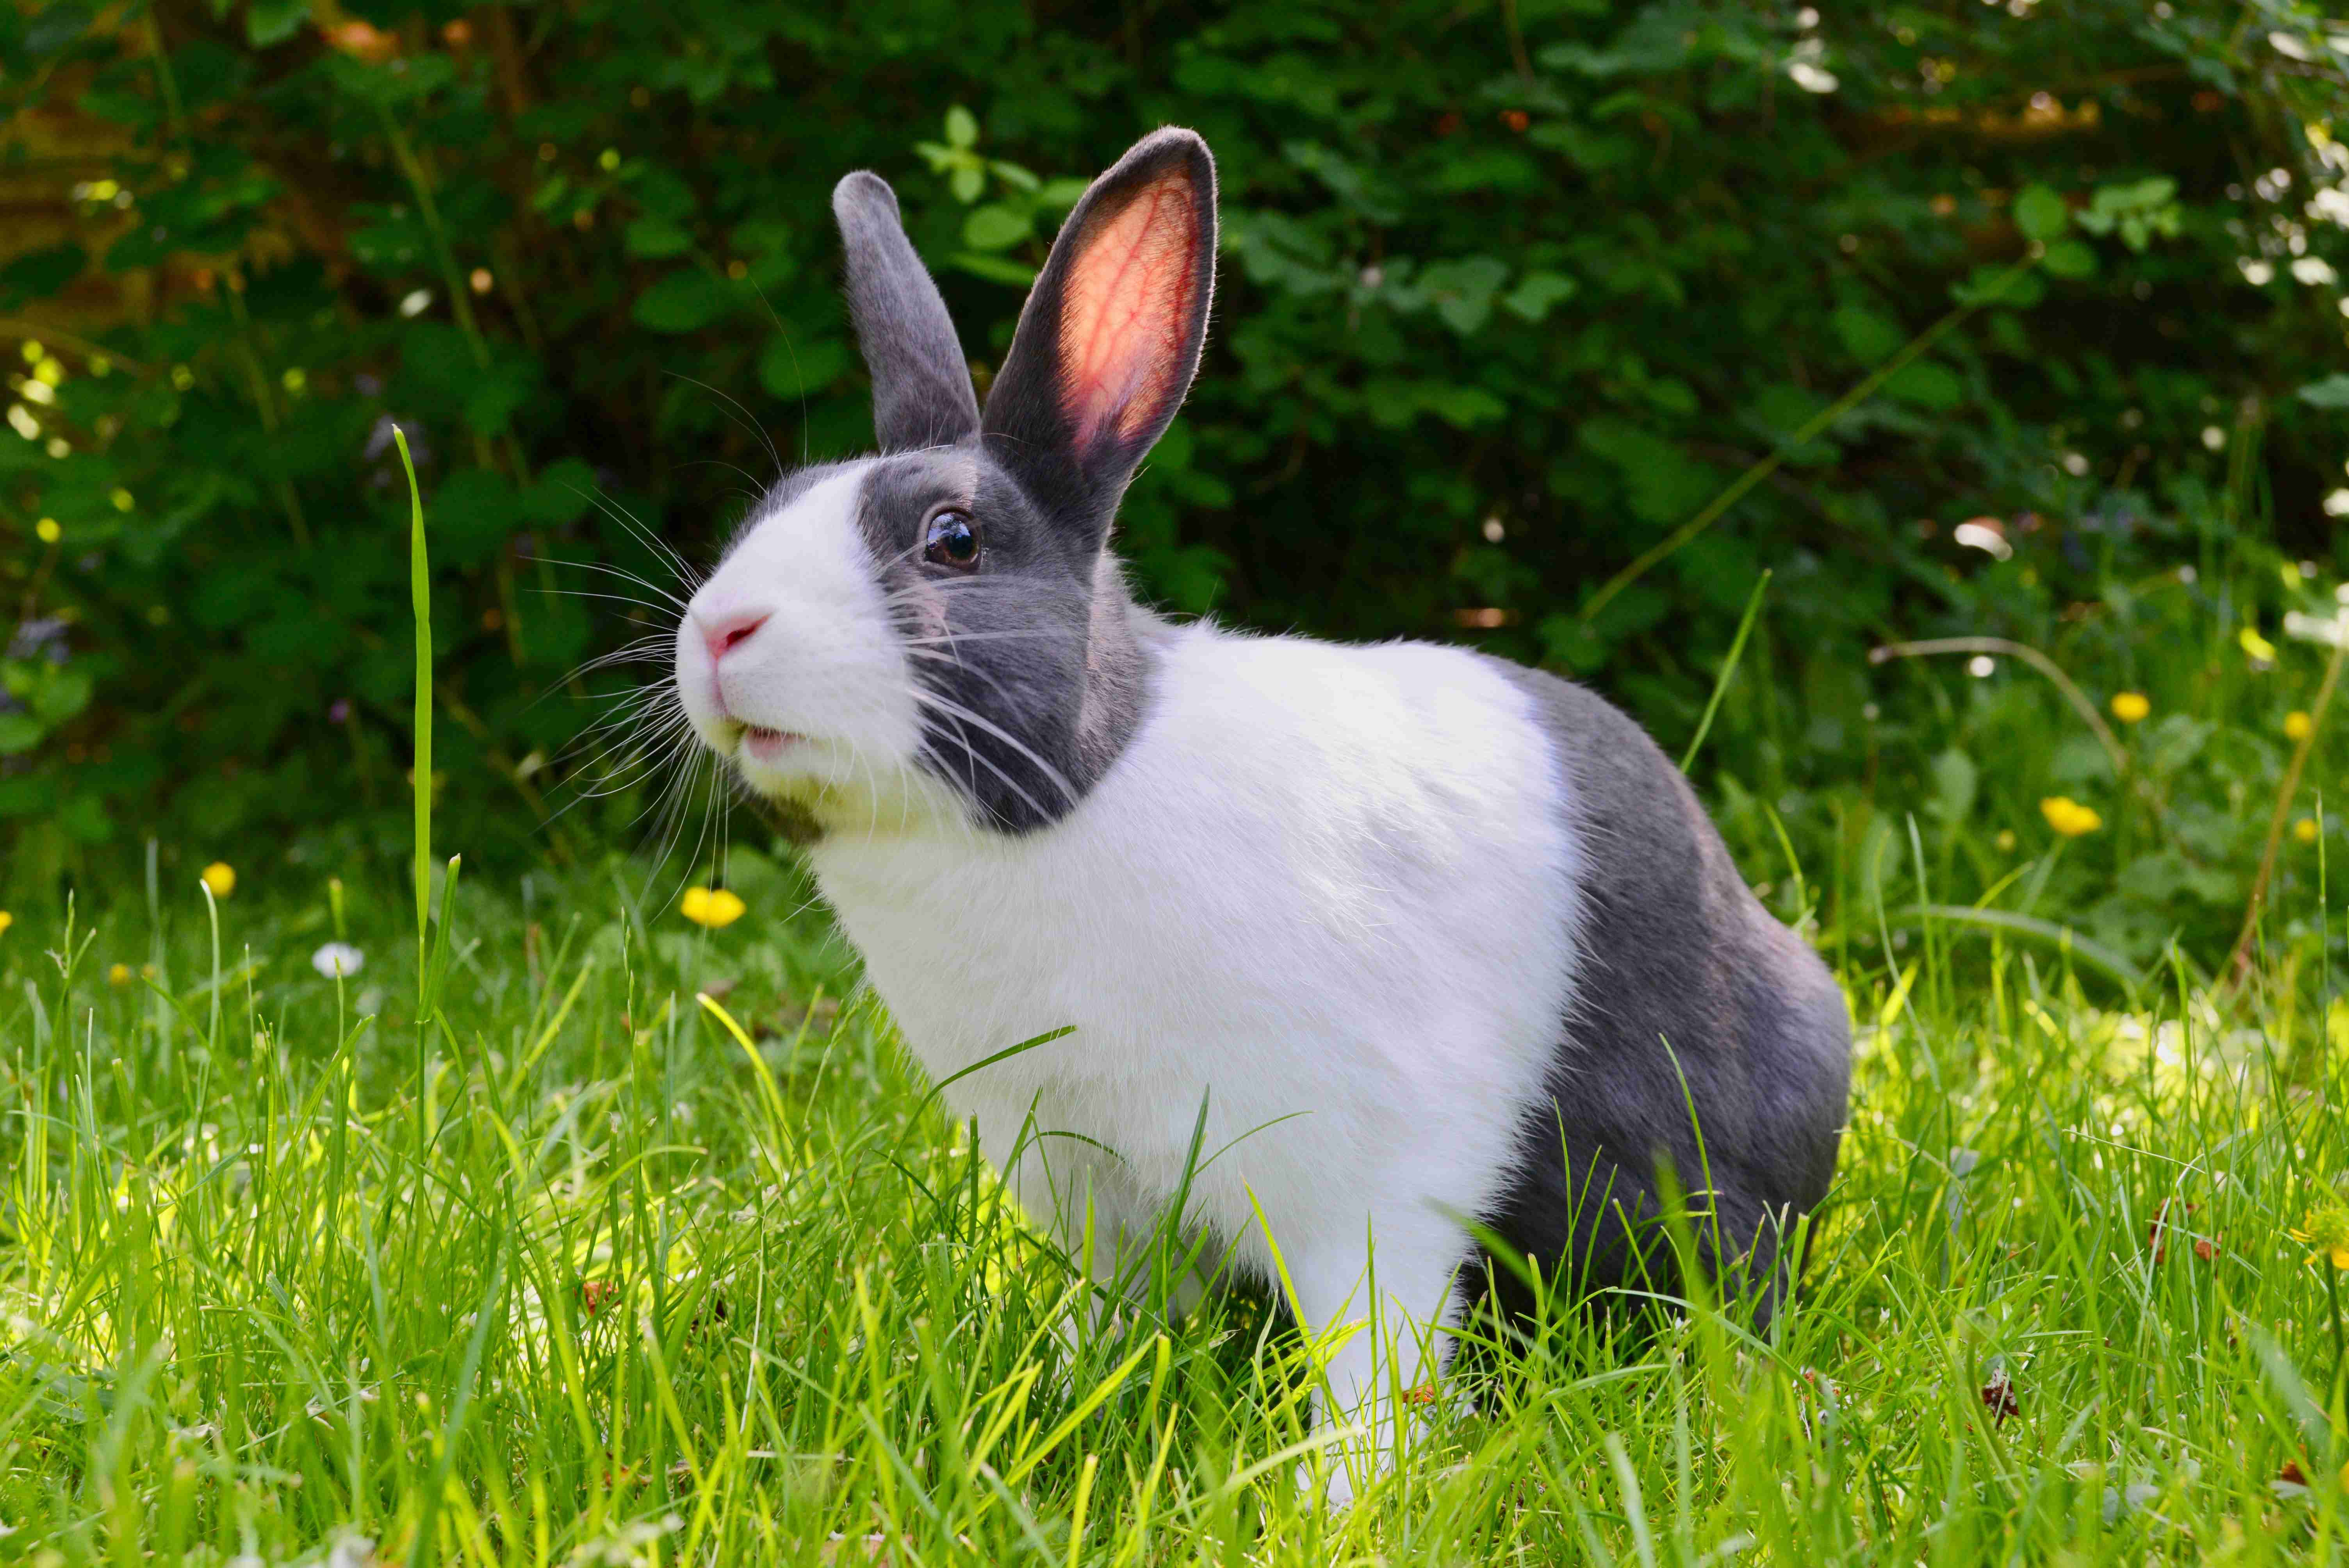 Protect Your Bunny: Identifying Common Household Items That Are Toxic to Rabbits